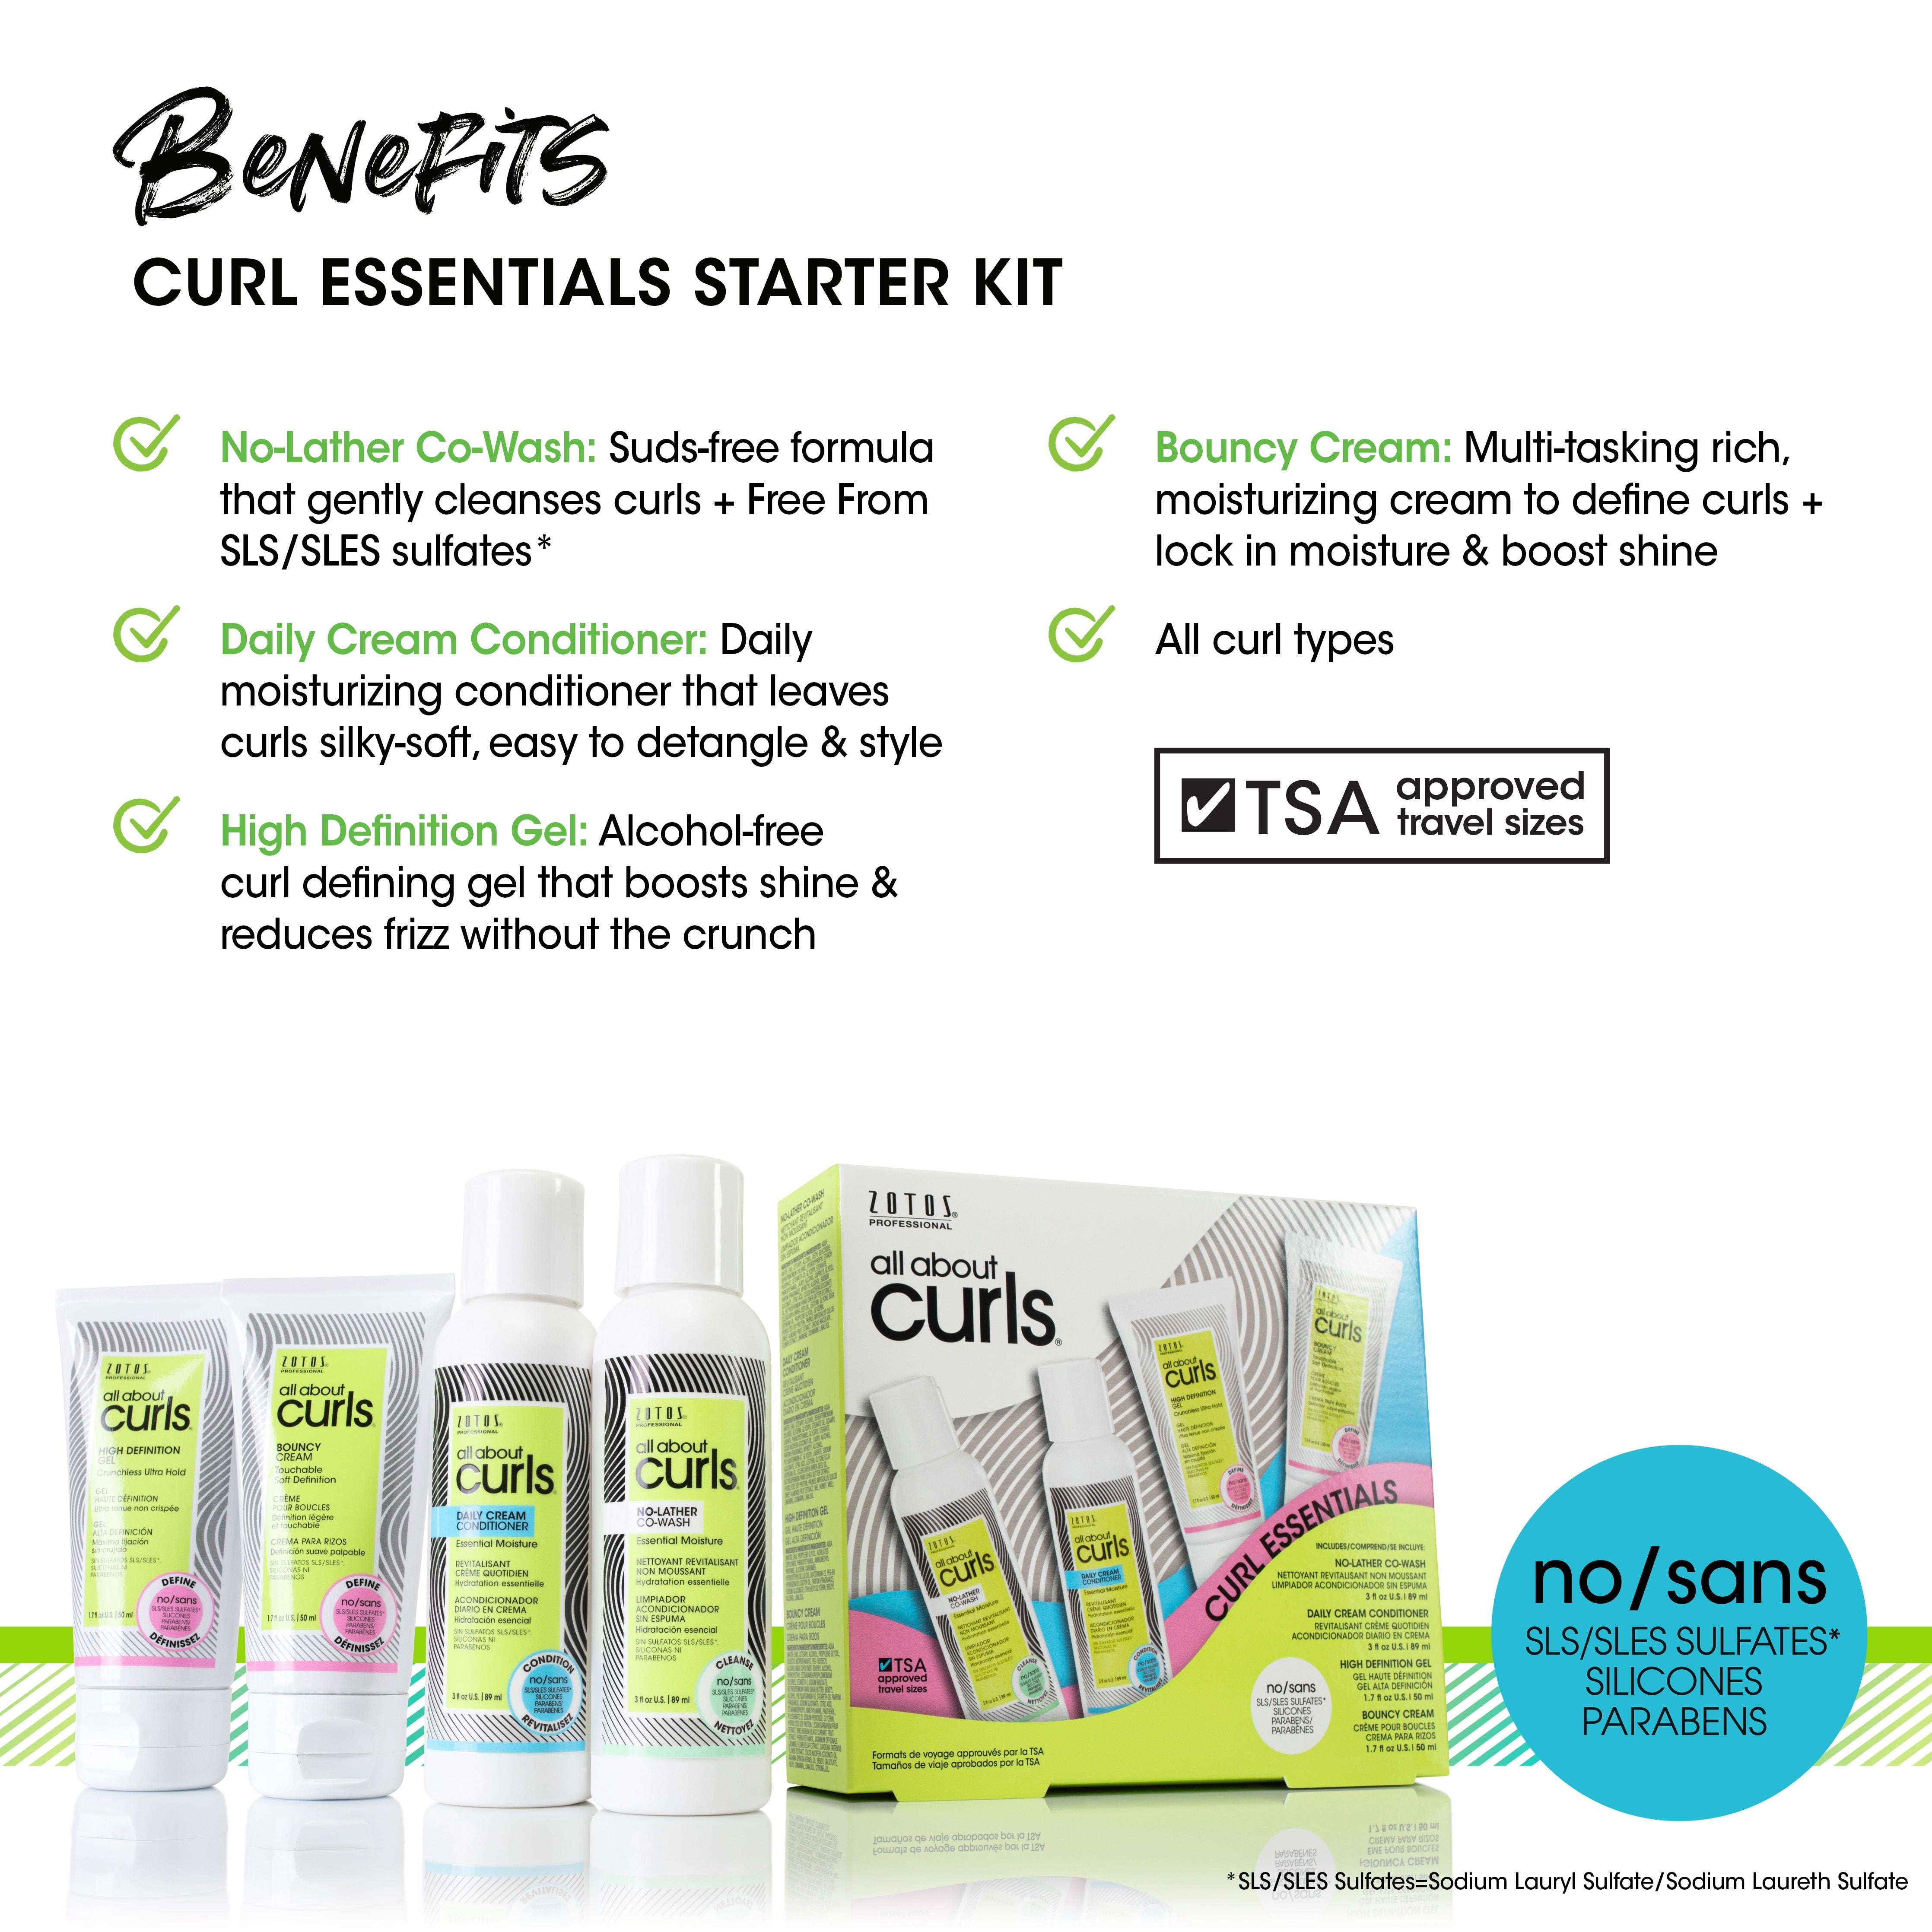 All About Curls Curl Essentials Starter Kit